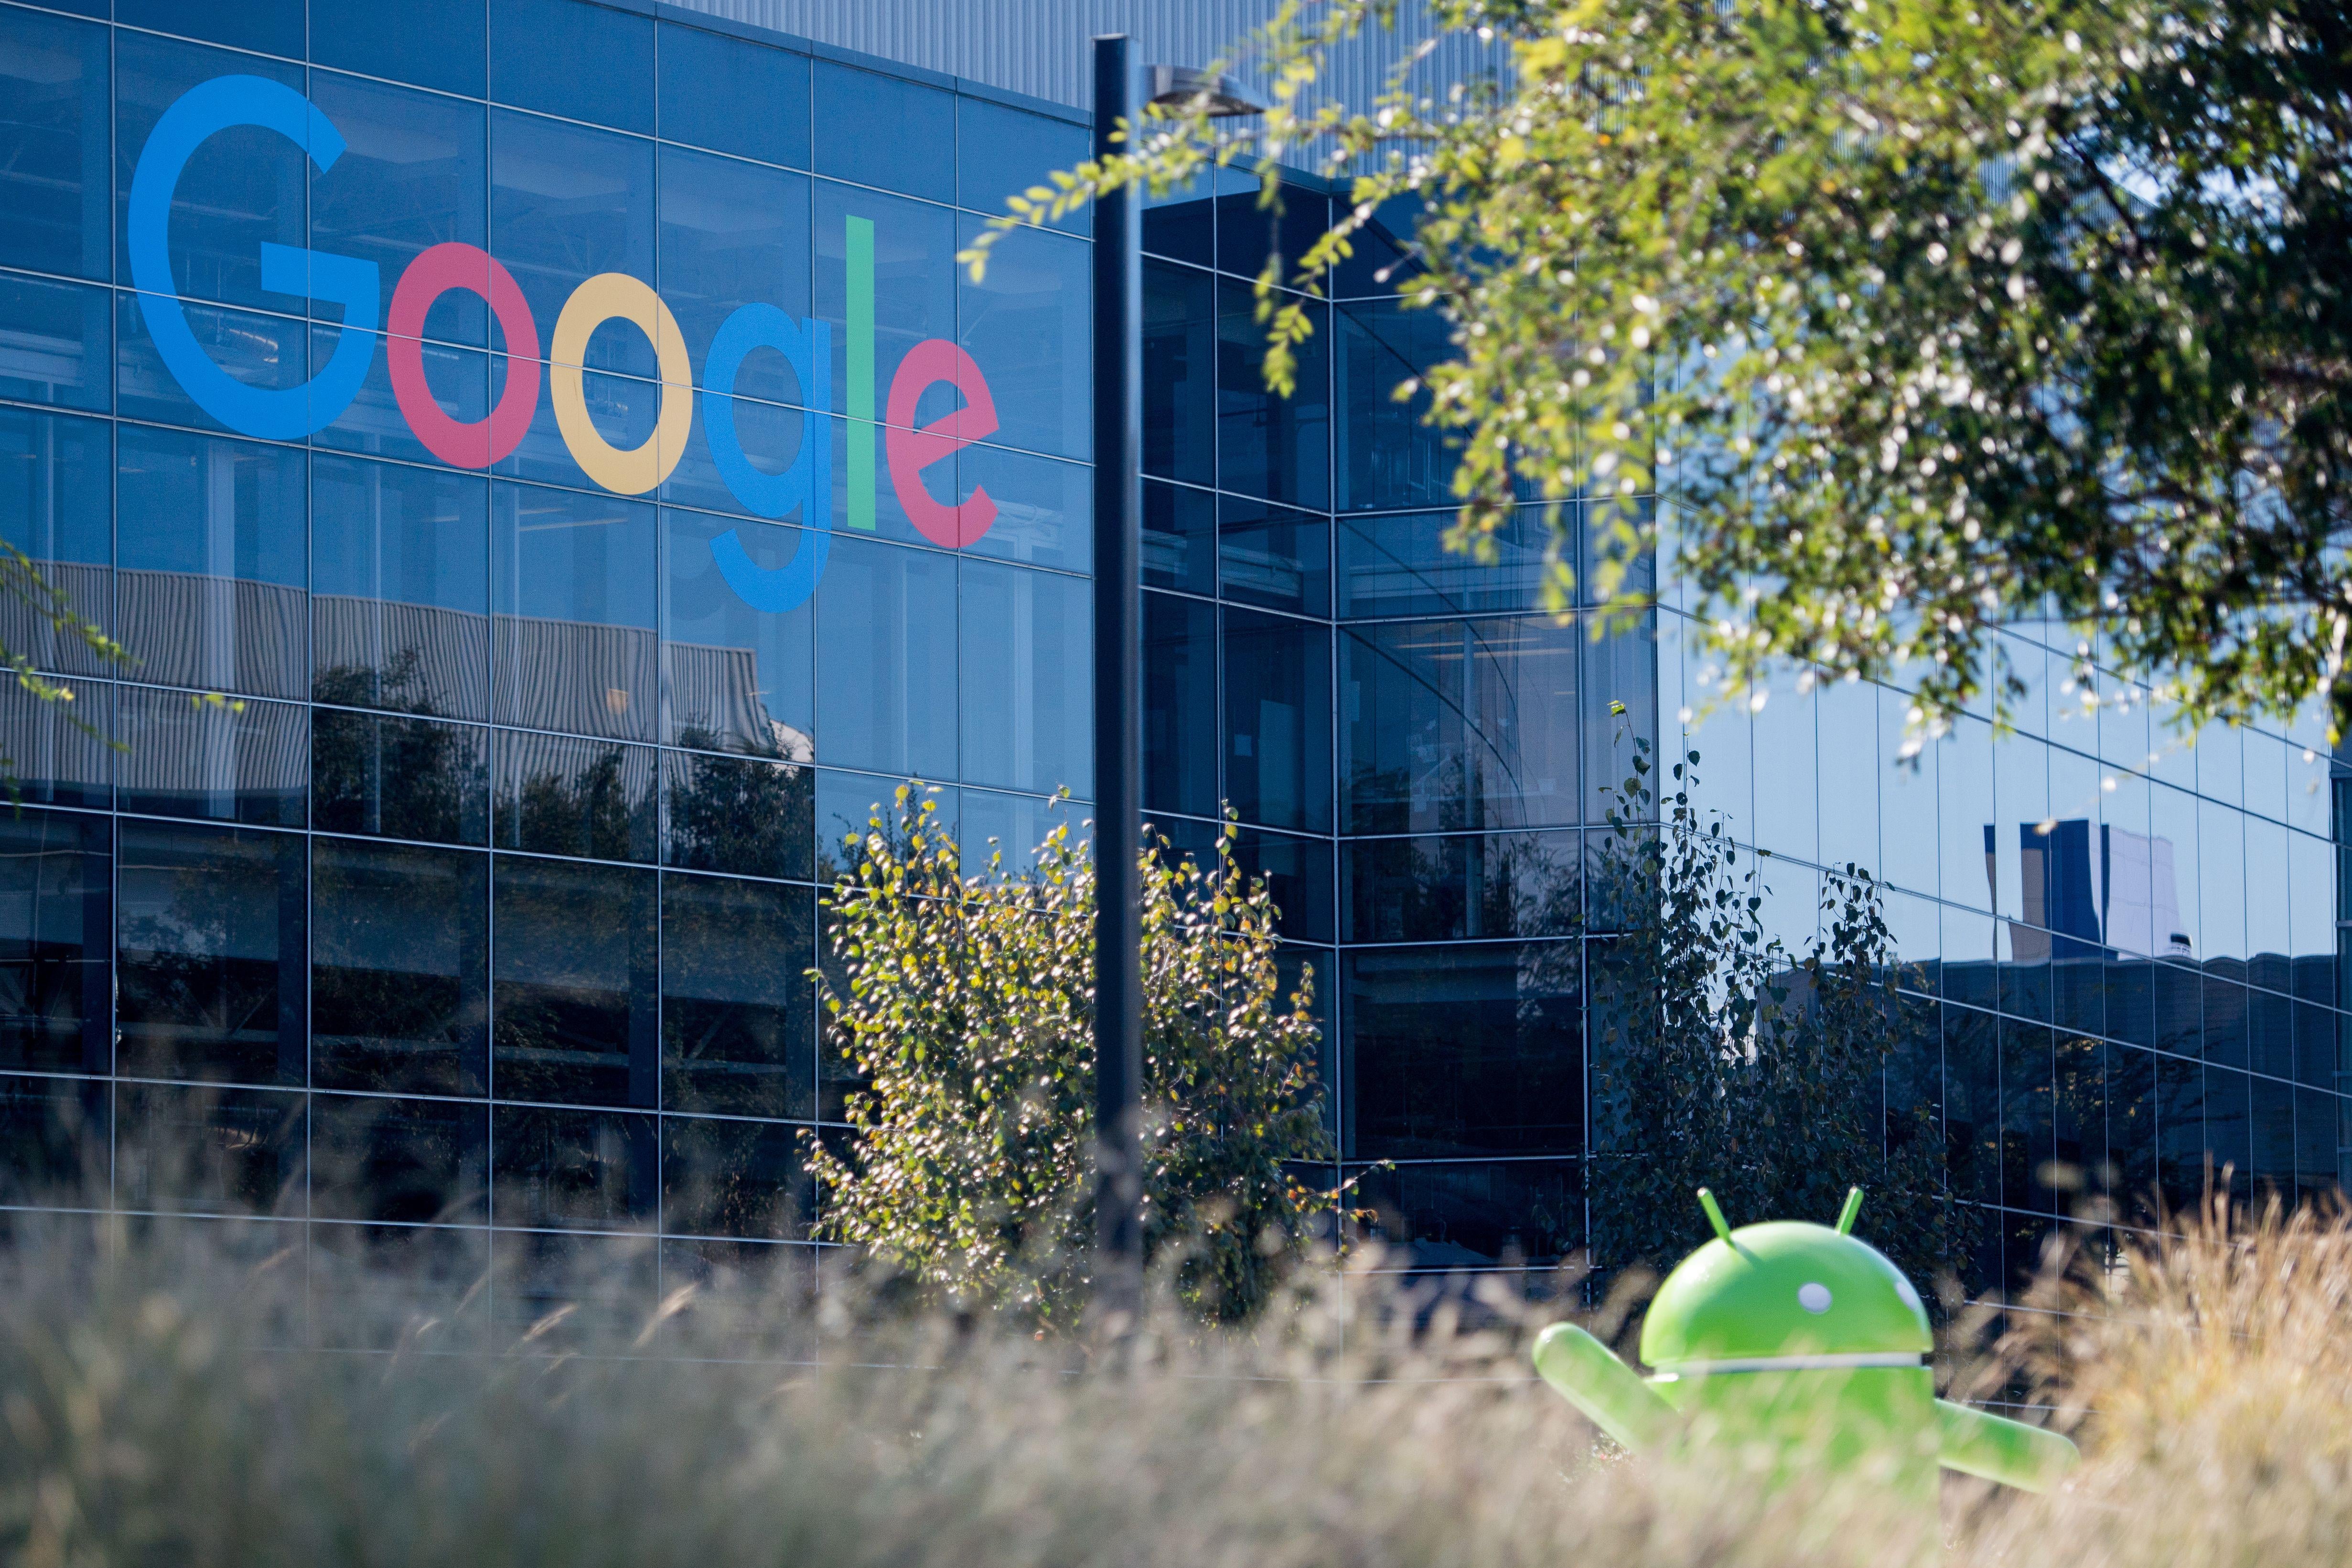 A Google logo and Android statue are seen at the Googleplex in Menlo Park, California on November 4, 2016.  / AFP PHOTO / JOSH EDELSON        (Photo credit should read JOSH EDELSON/AFP/Getty Images)